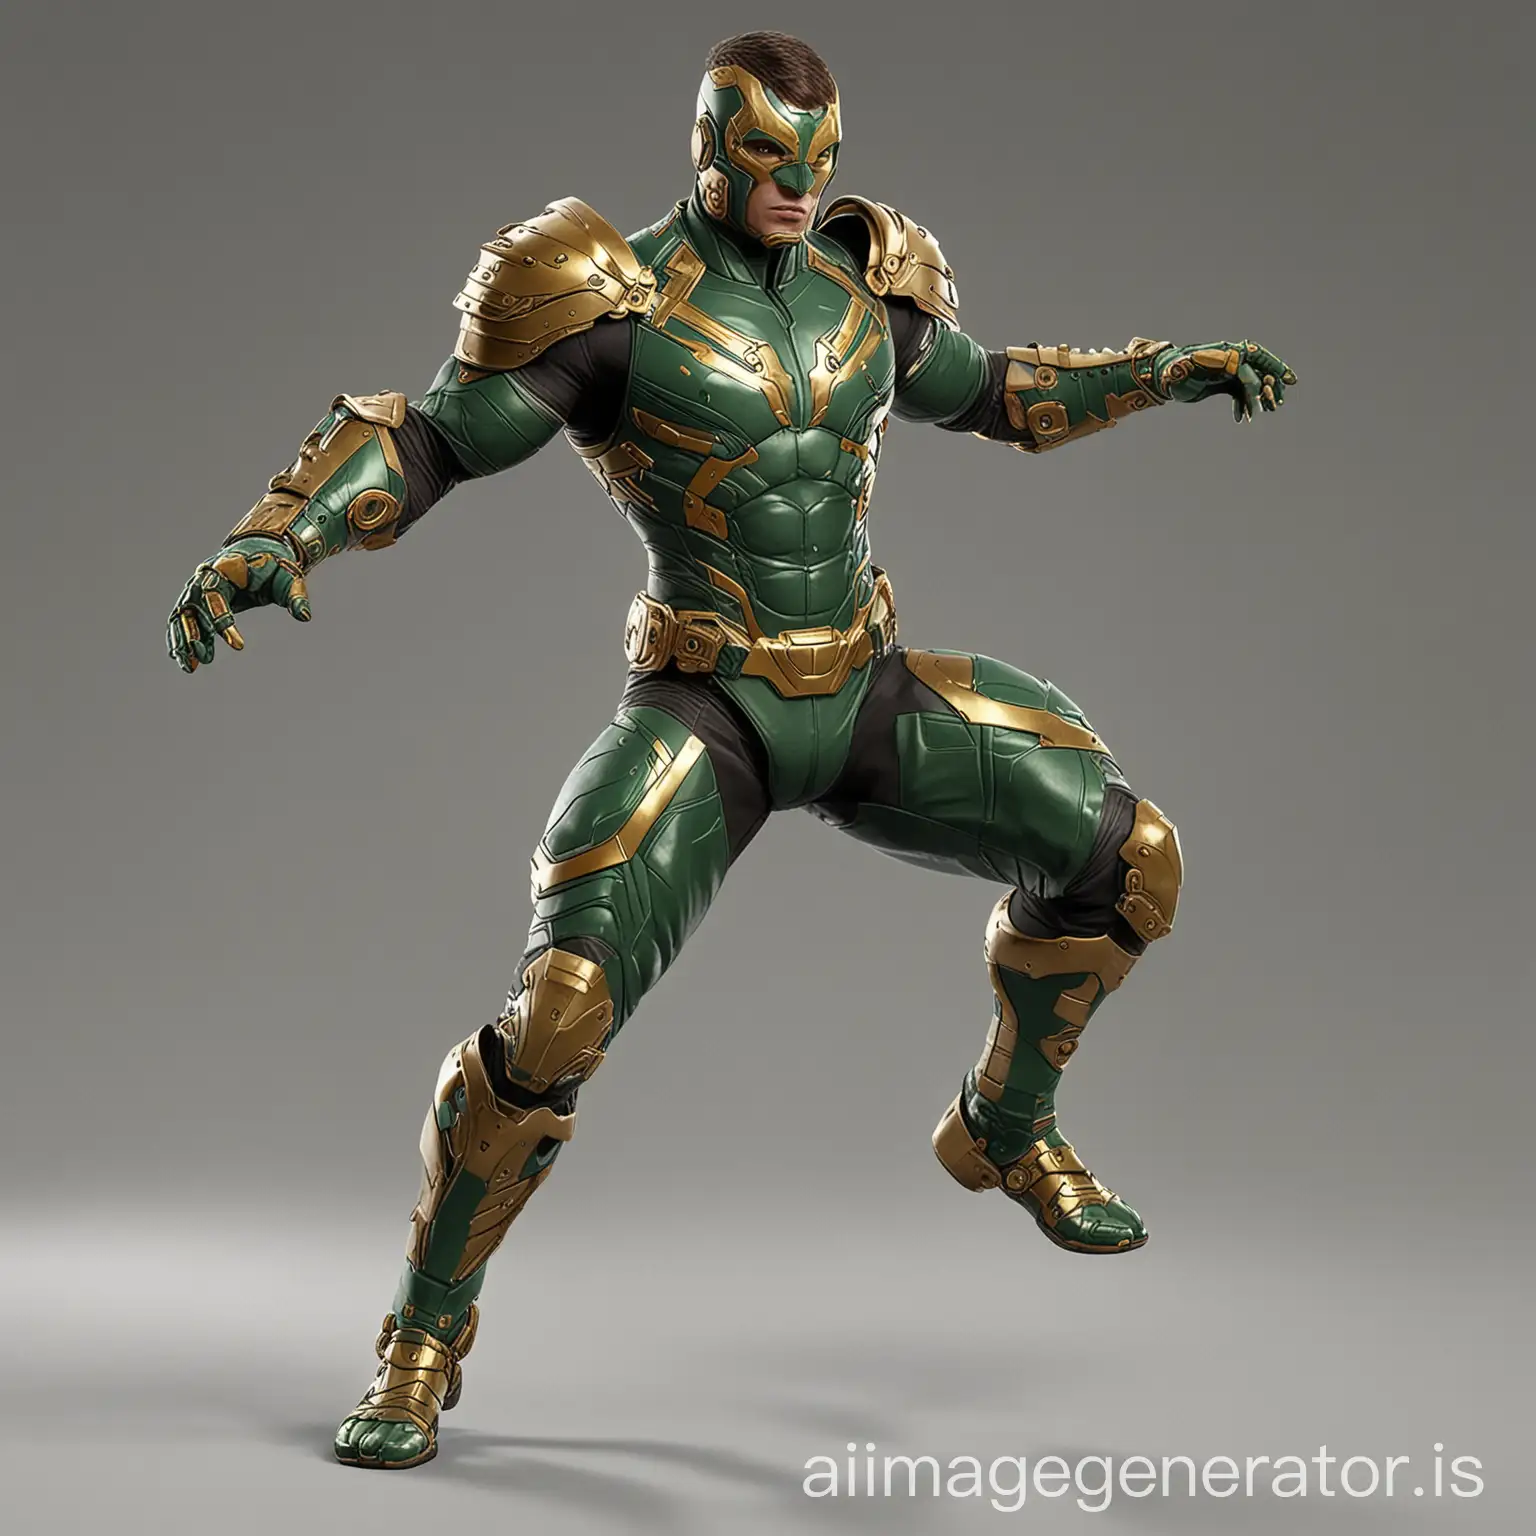 COMBAT POSE ENERGY BANDS 6,4 FT, MUSCULAR_THIN MALE _SUPERHERO_WITH_ ARMOR GREEN OPEN  BROWN HAIR VIEW FACEMASK GREEN, HARNESS_AND_BRACELET,REALISTIC  GOLD FOREARM GREEN SUIT _HI_TECH_ARMOUR SUIT_WITH_ARMS_OUT_CAMELEON COLOR__3___1 POSE IN ACTION, COMBAT POSE, 